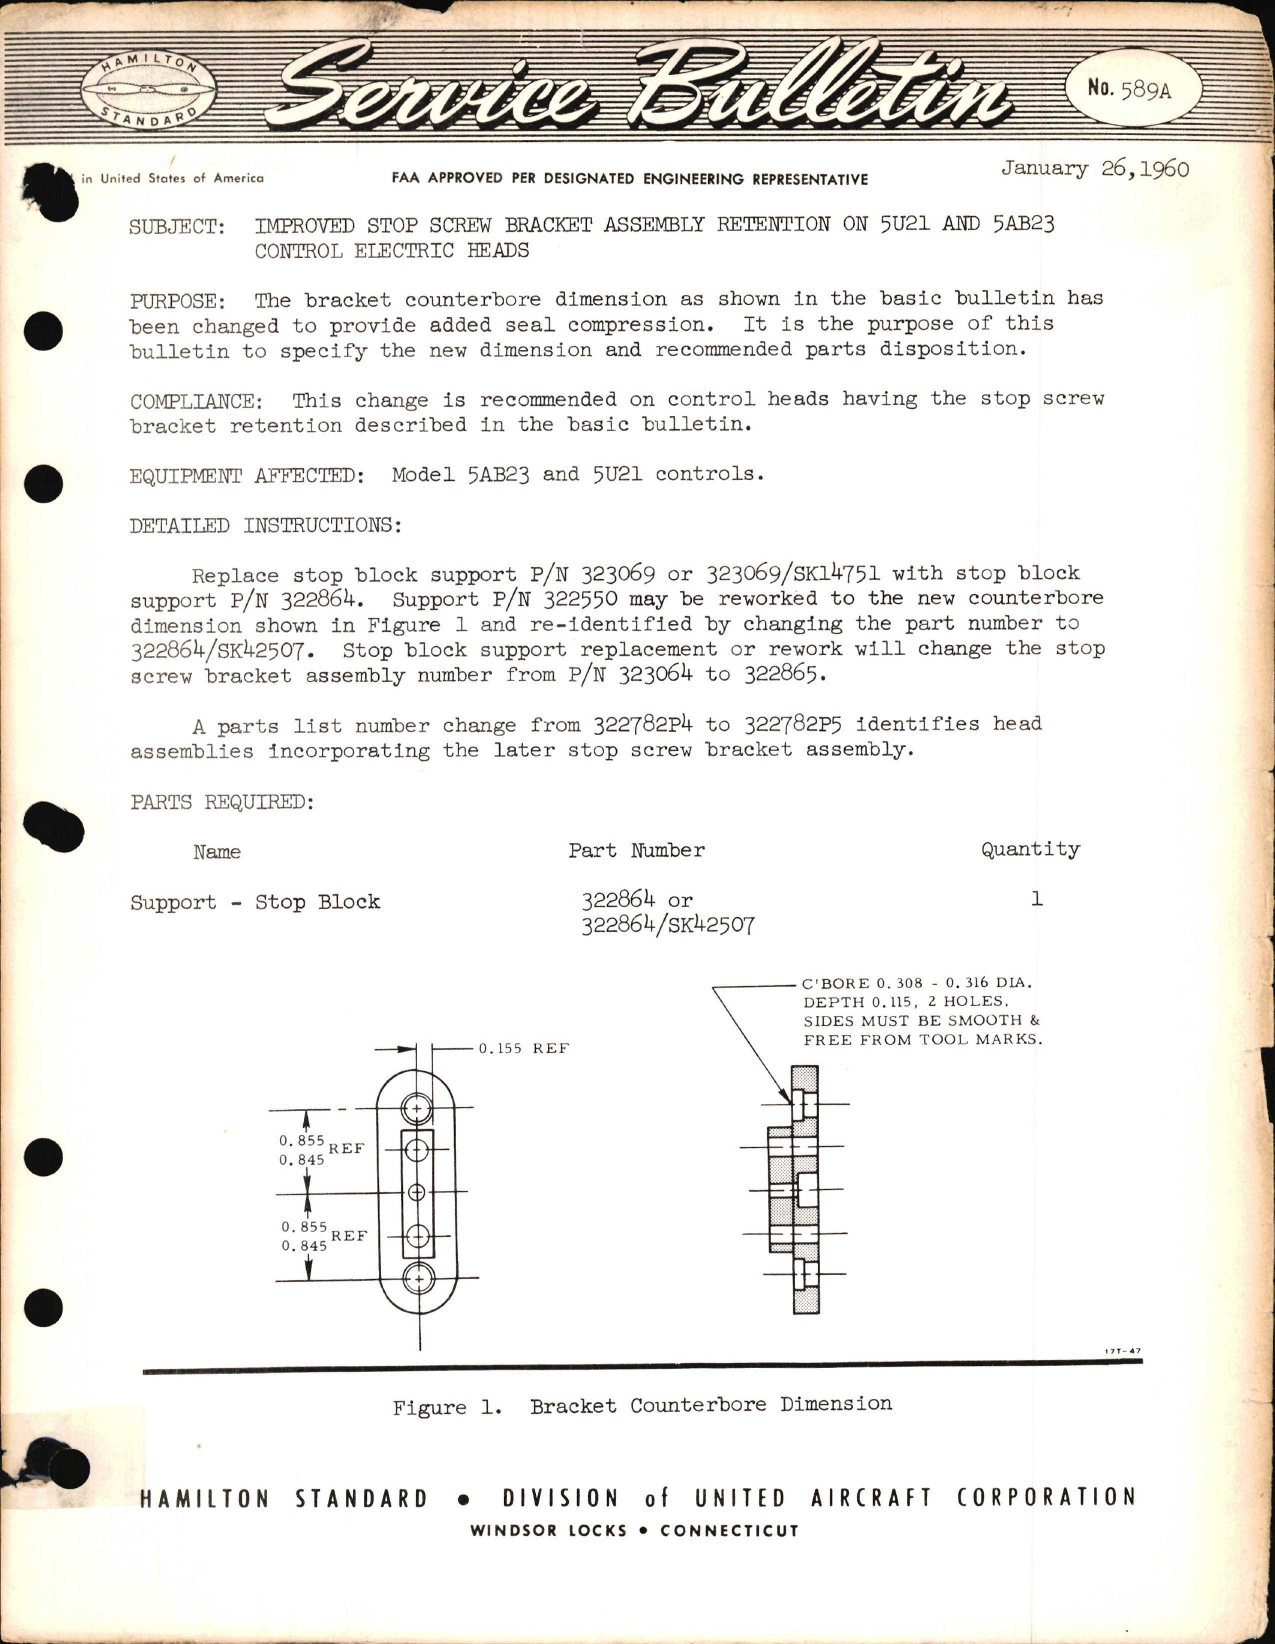 Sample page 1 from AirCorps Library document: Improved Stop Screw Bracket Assembly Retention on 5U21, and 5AB23, Control Electric Heads